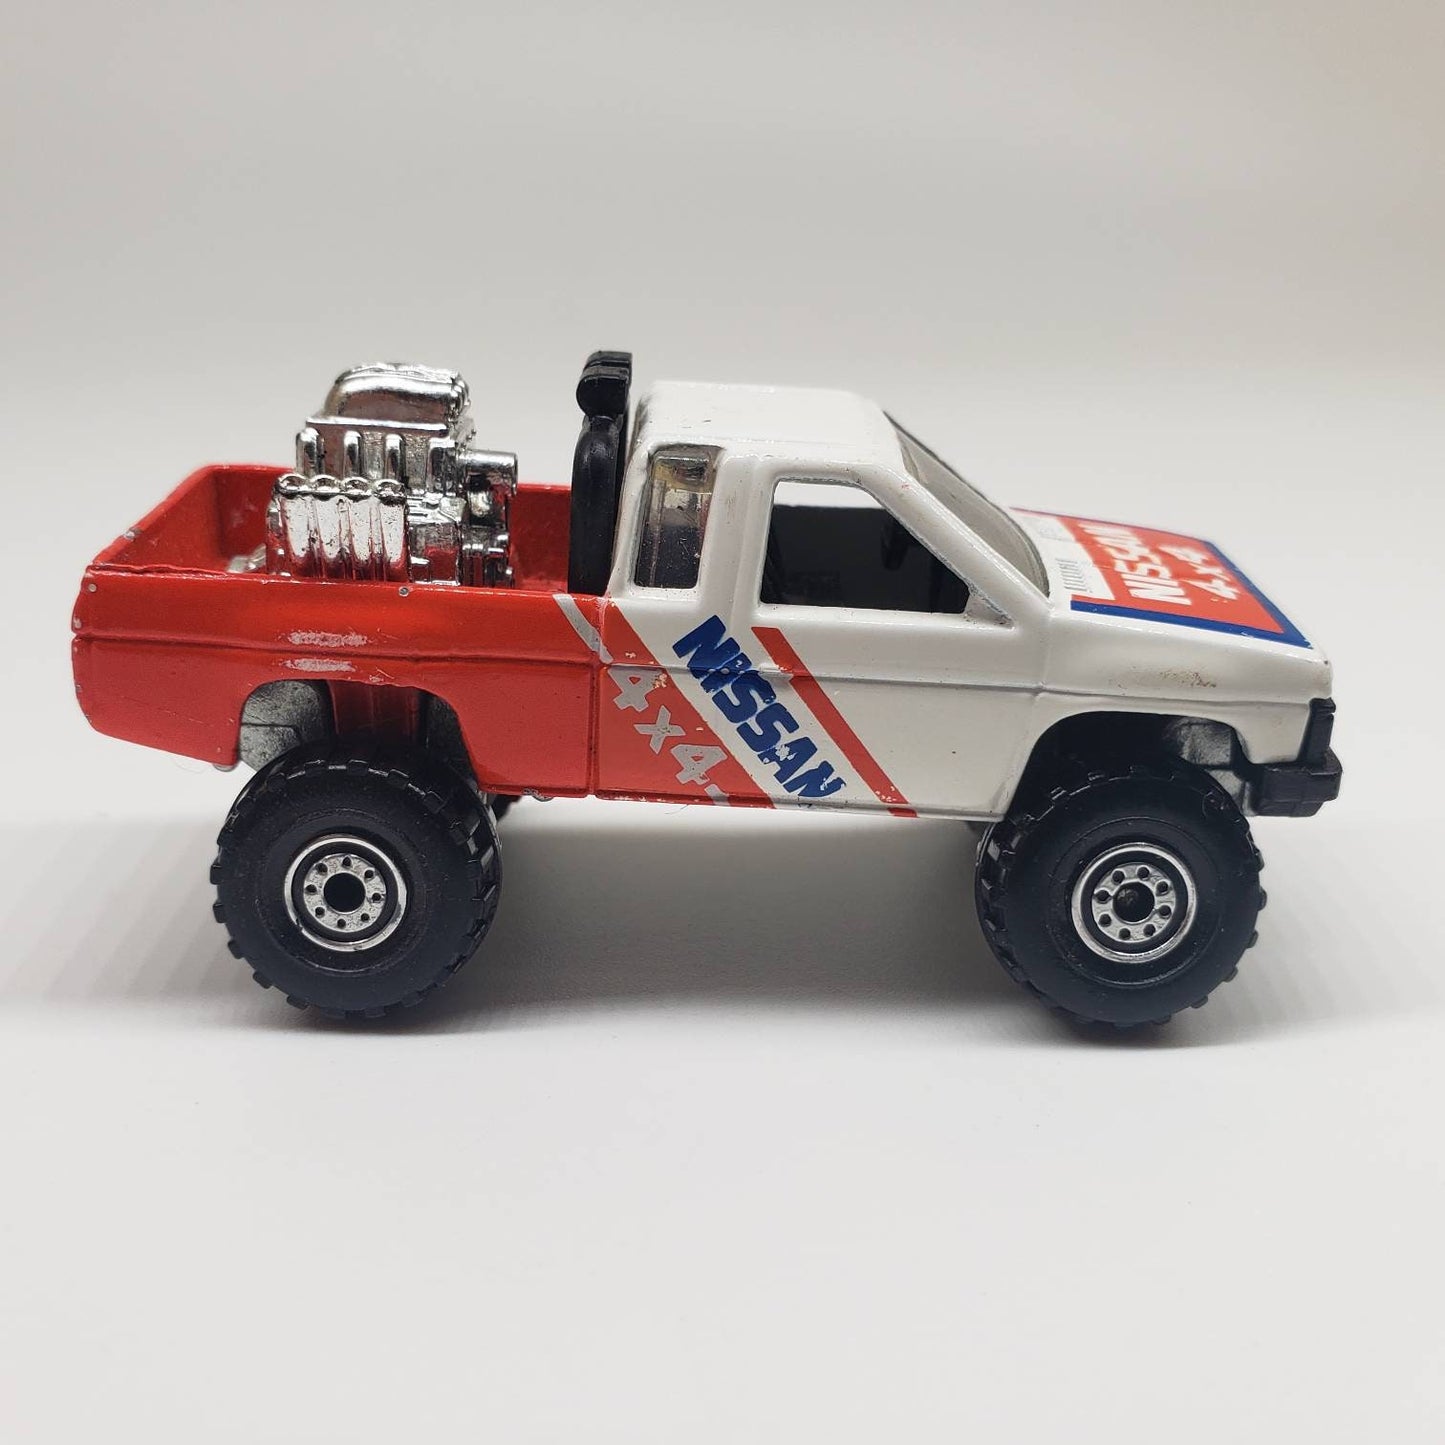 Hot Wheels Nissan Hardbody 4x4 White and Red Trailbusters Perfect Birthday Gift Miniature Collectable Scale Model Toy Car